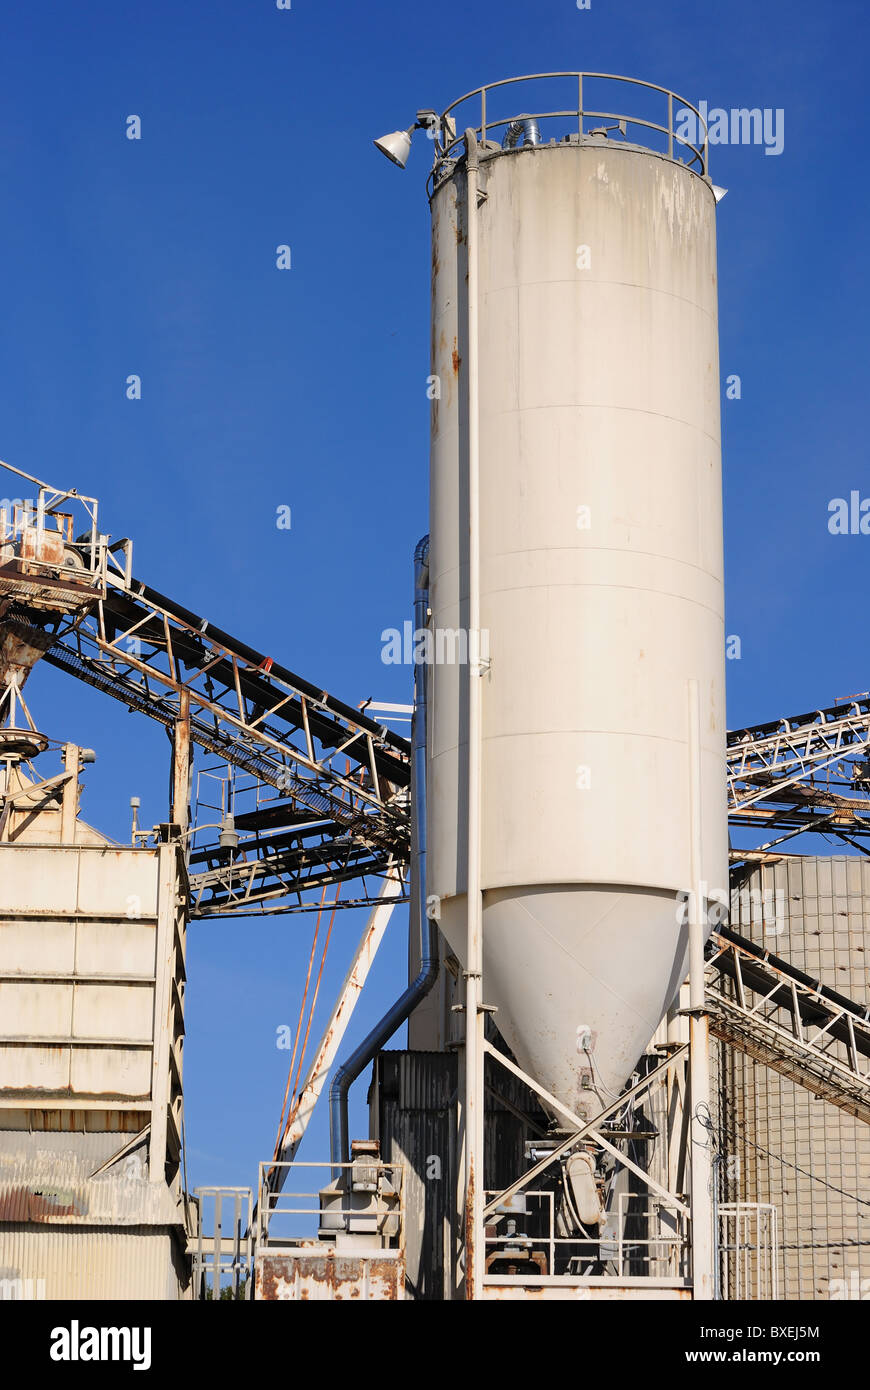 An industrial cement processing facility. Stock Photo